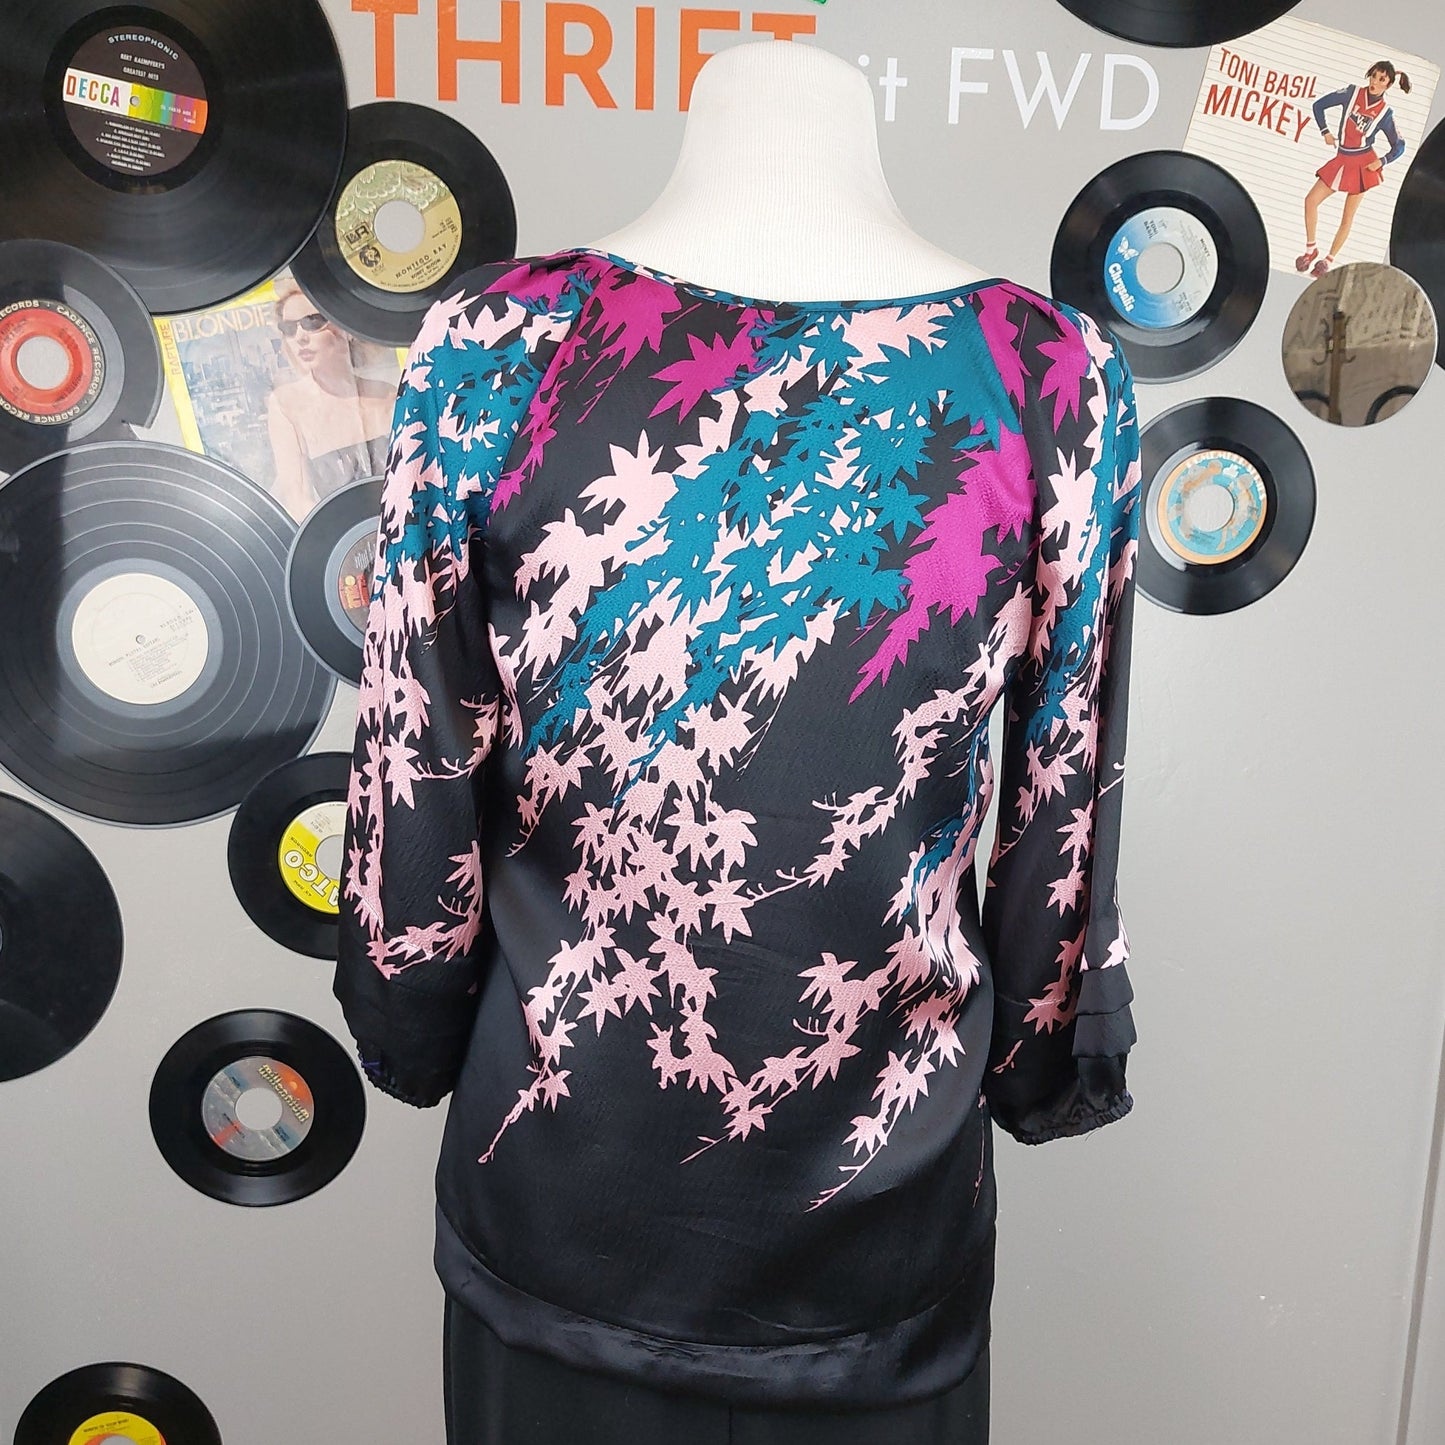 DVF 100% Silk  Size 6 Black Pink Teal  Ruffle Top Blouse